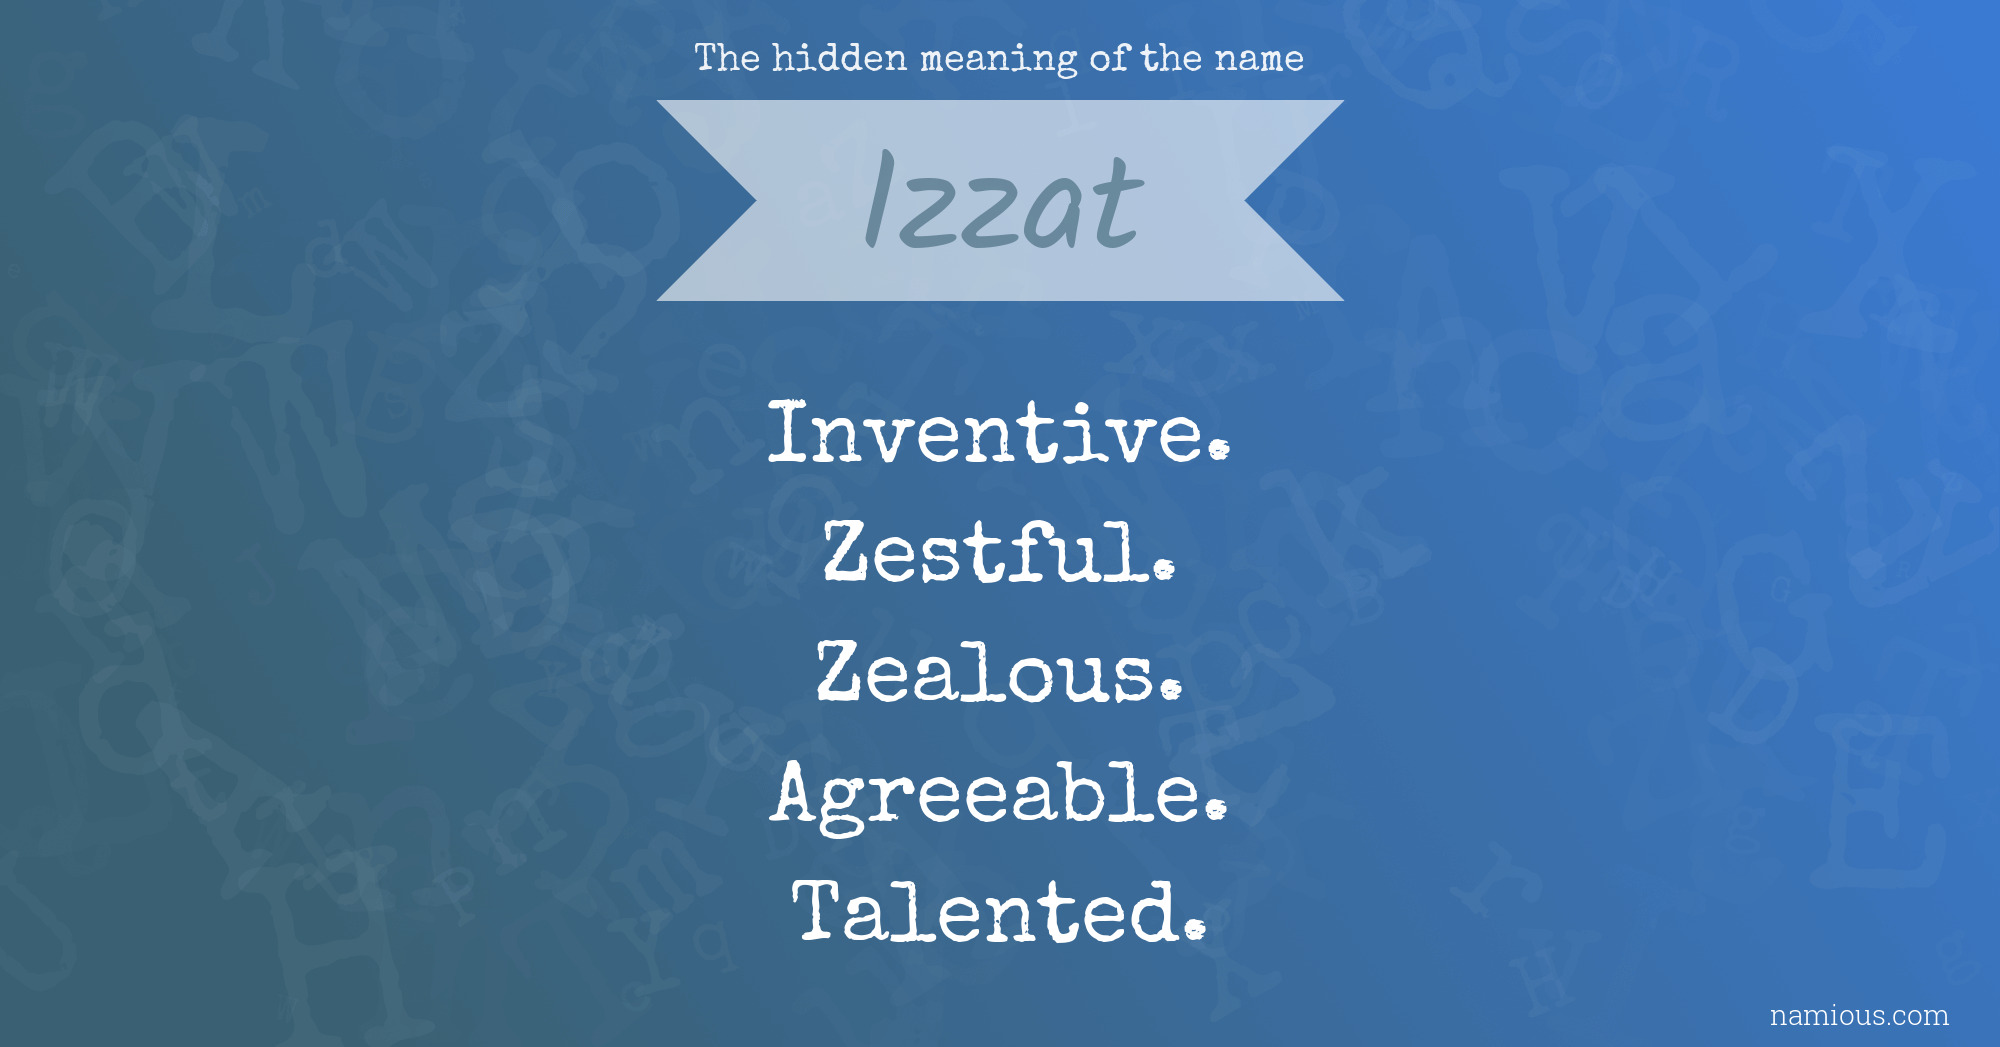 The hidden meaning of the name Izzat